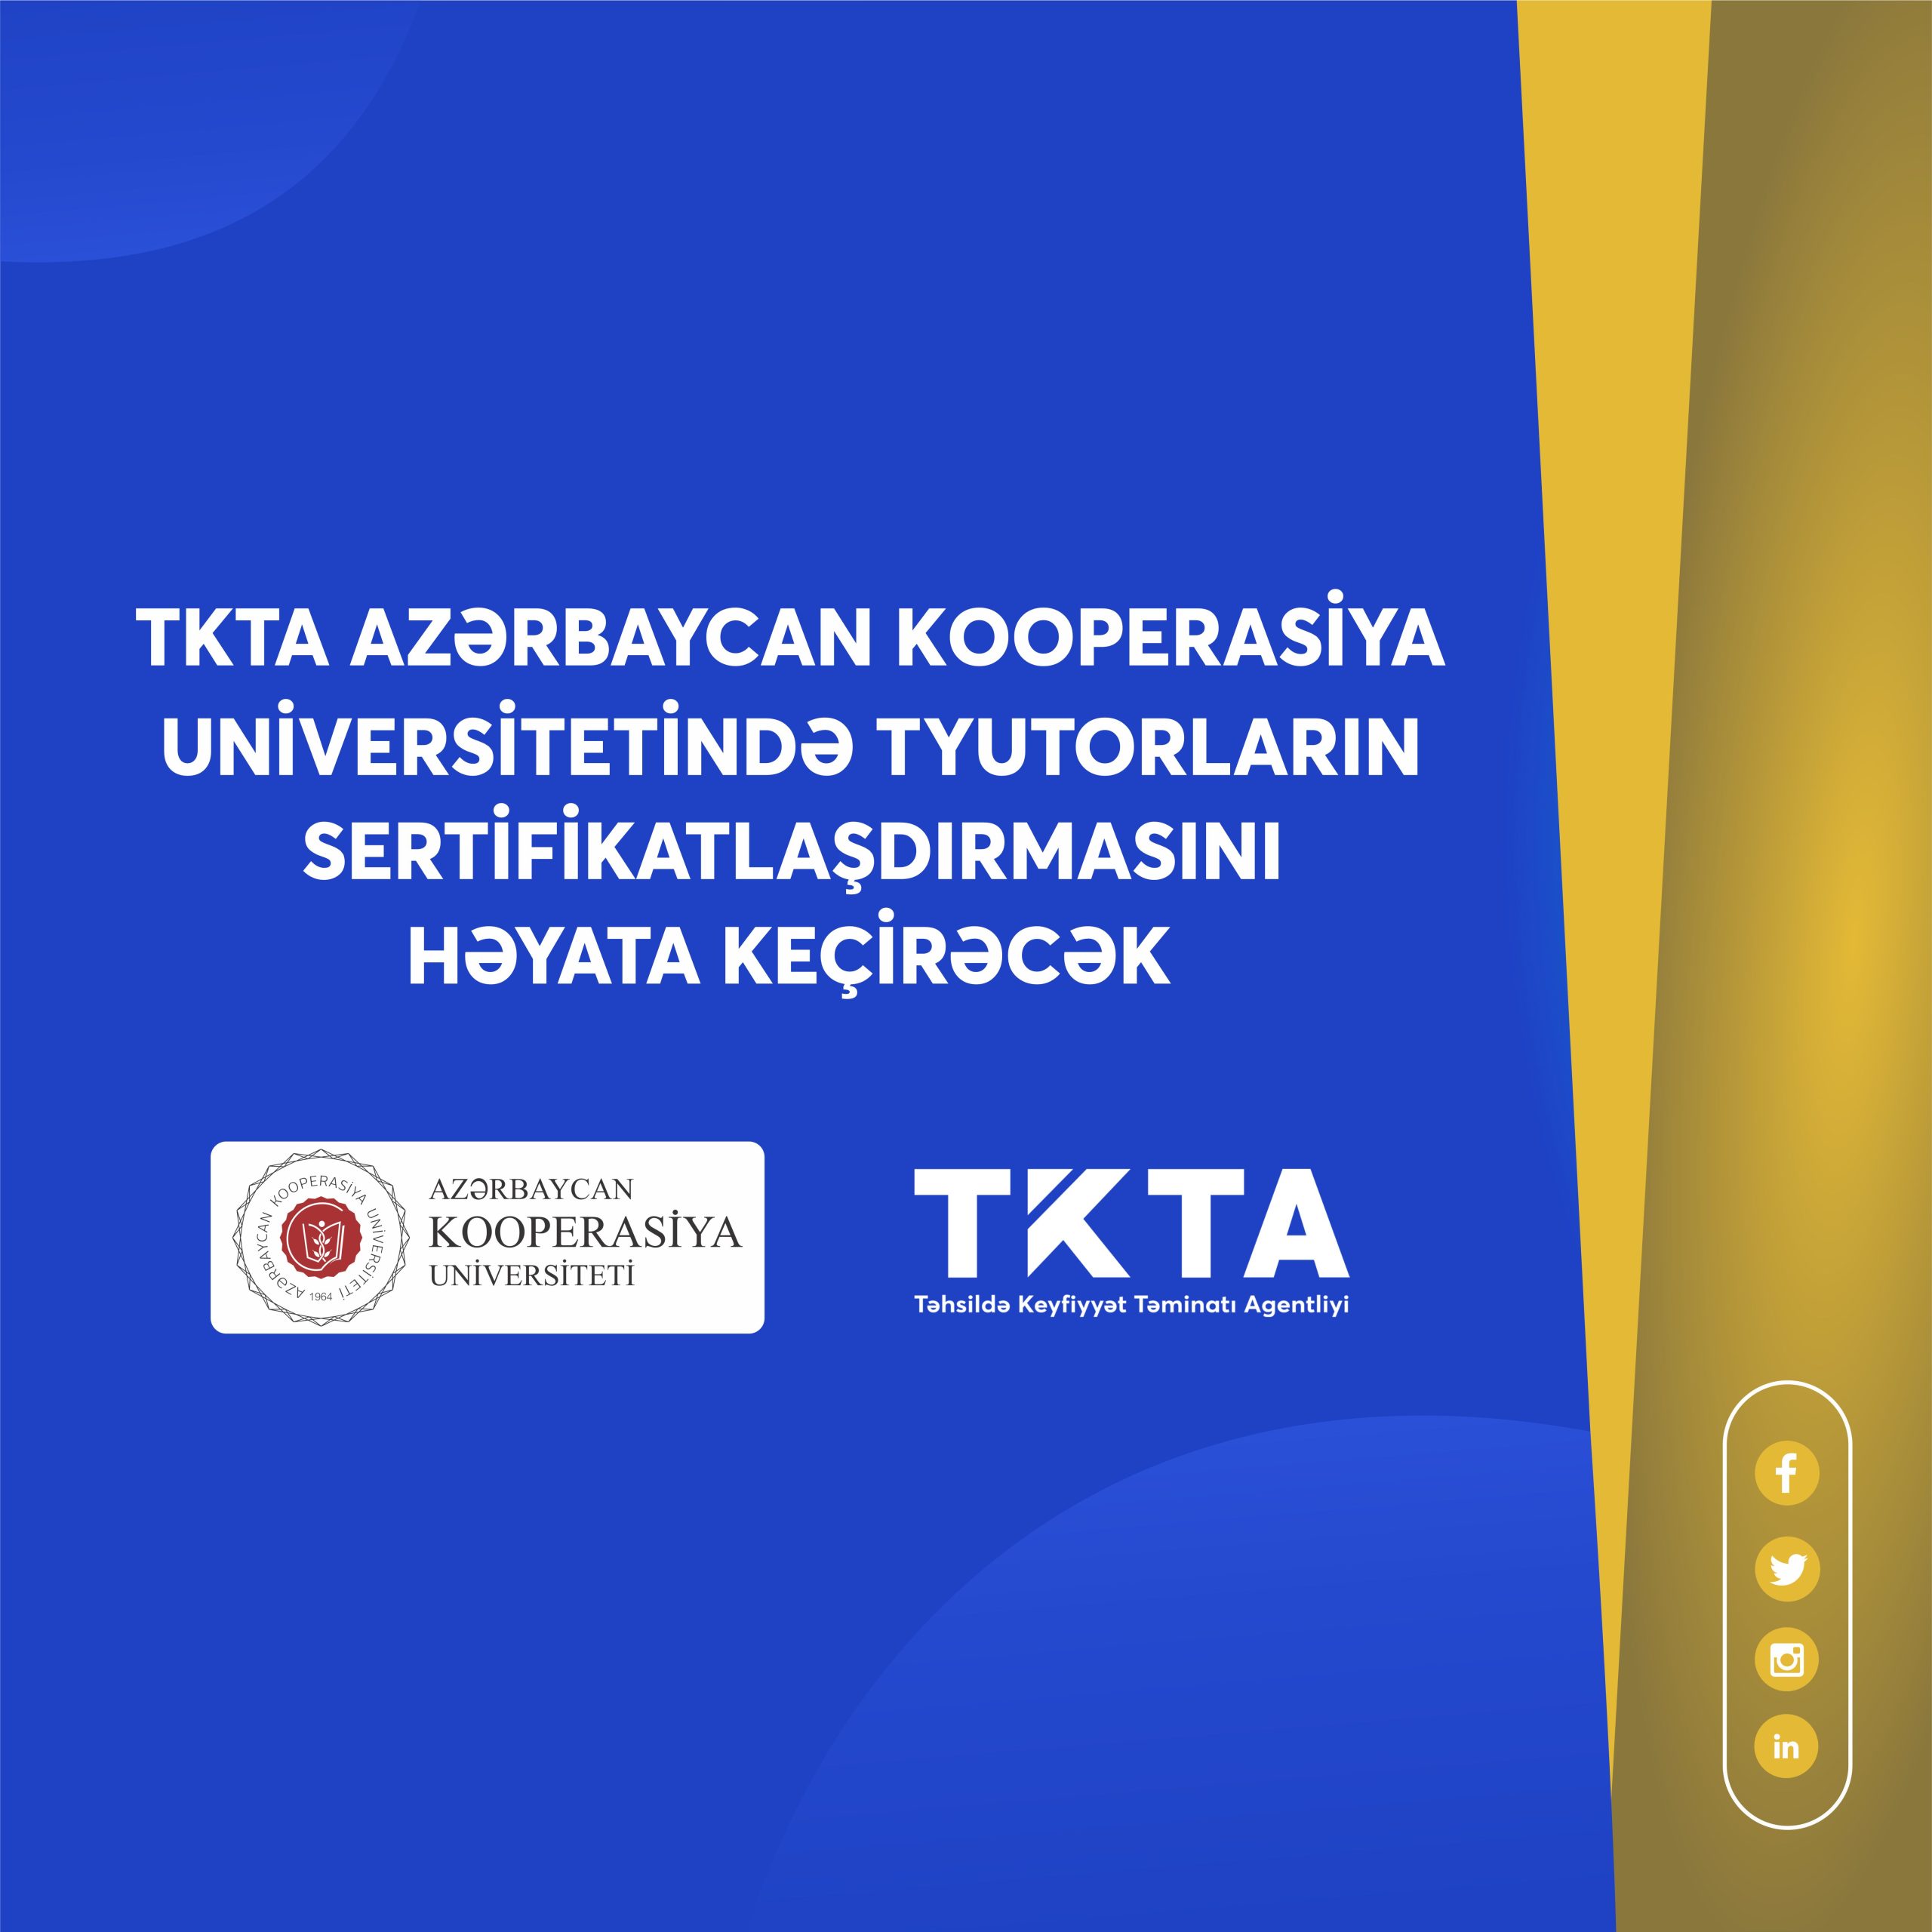 TKTA will carry out the certification of tutors at Azerbaijan Cooperation University